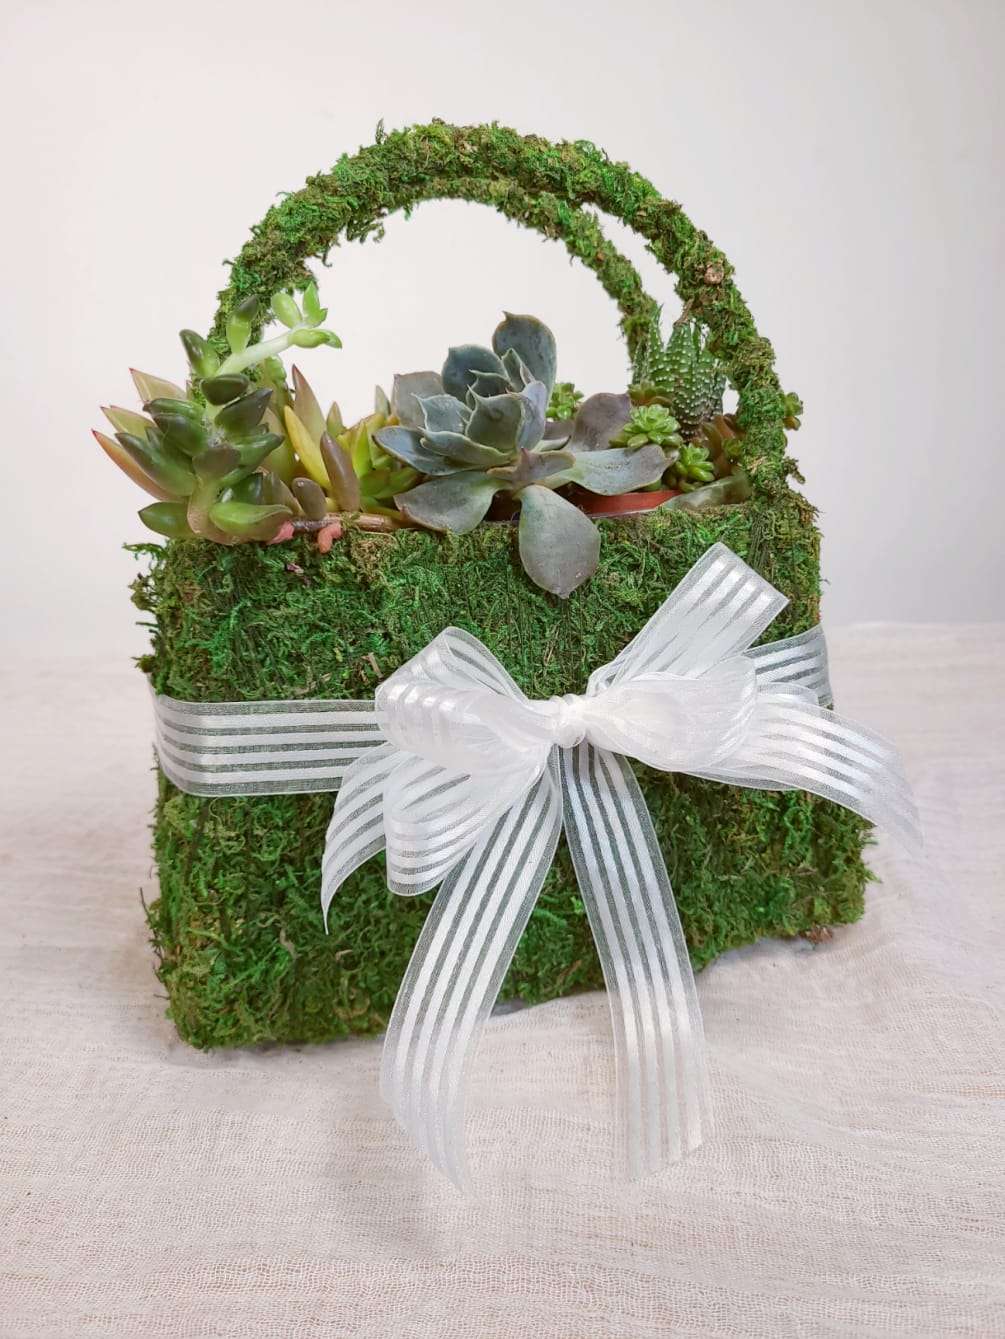 Get your mom a living purse this Mother&#039;s Day! This chic moss